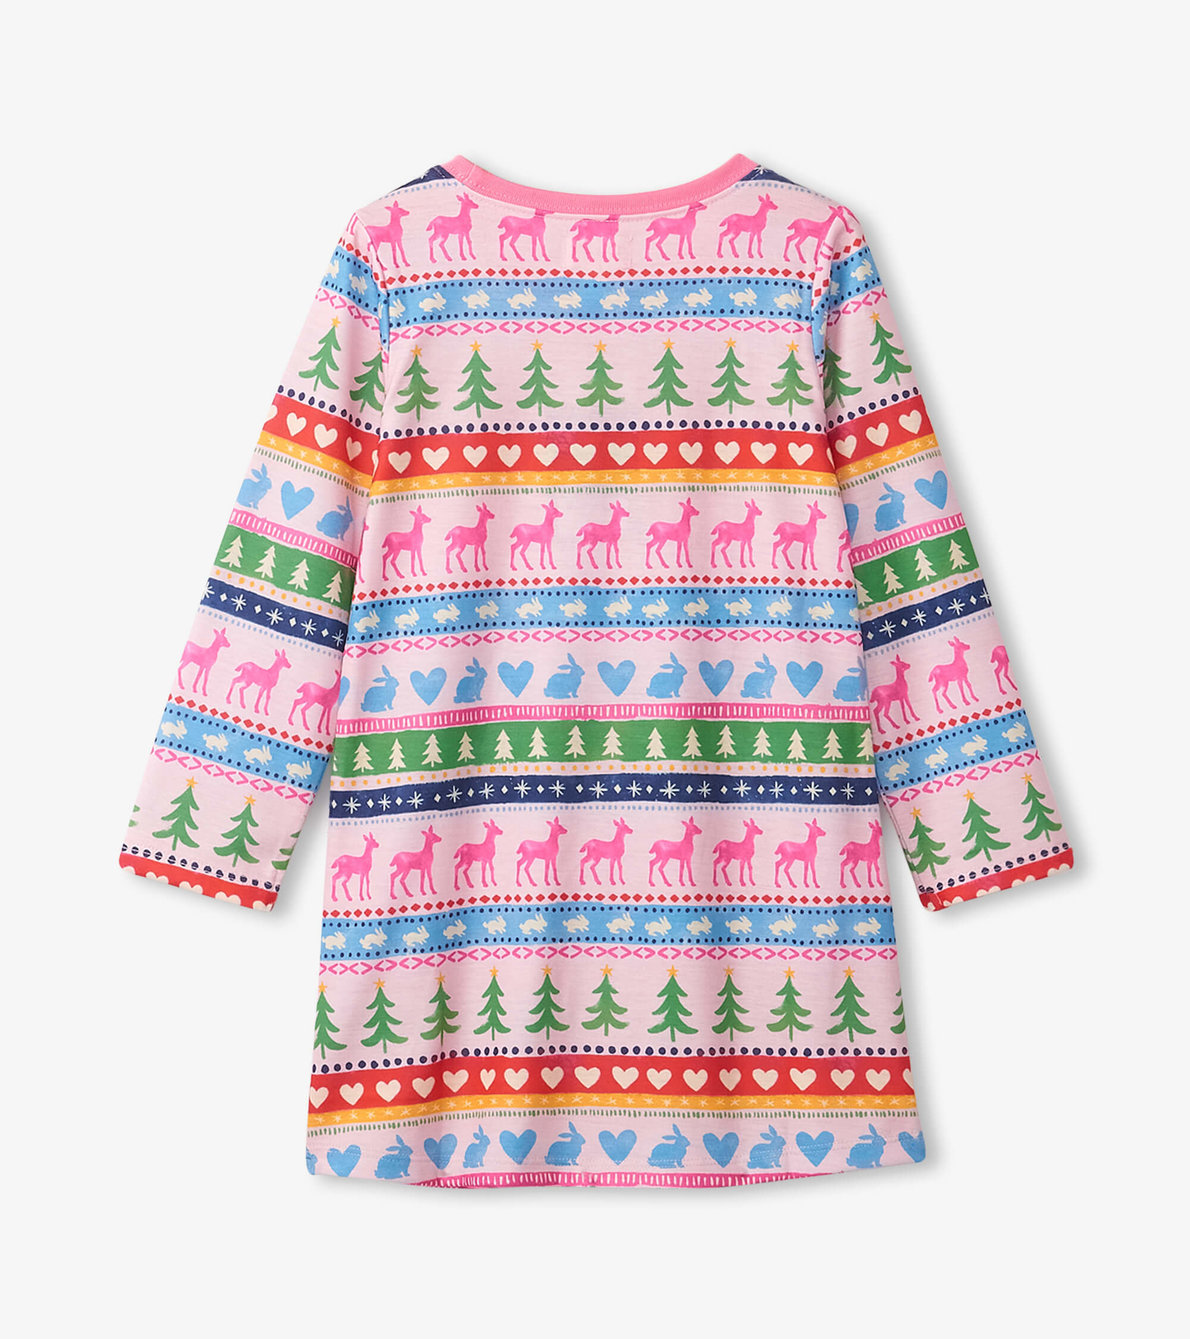 View larger image of Pink Painted Fairisle Long Sleeve Girls Nightgown